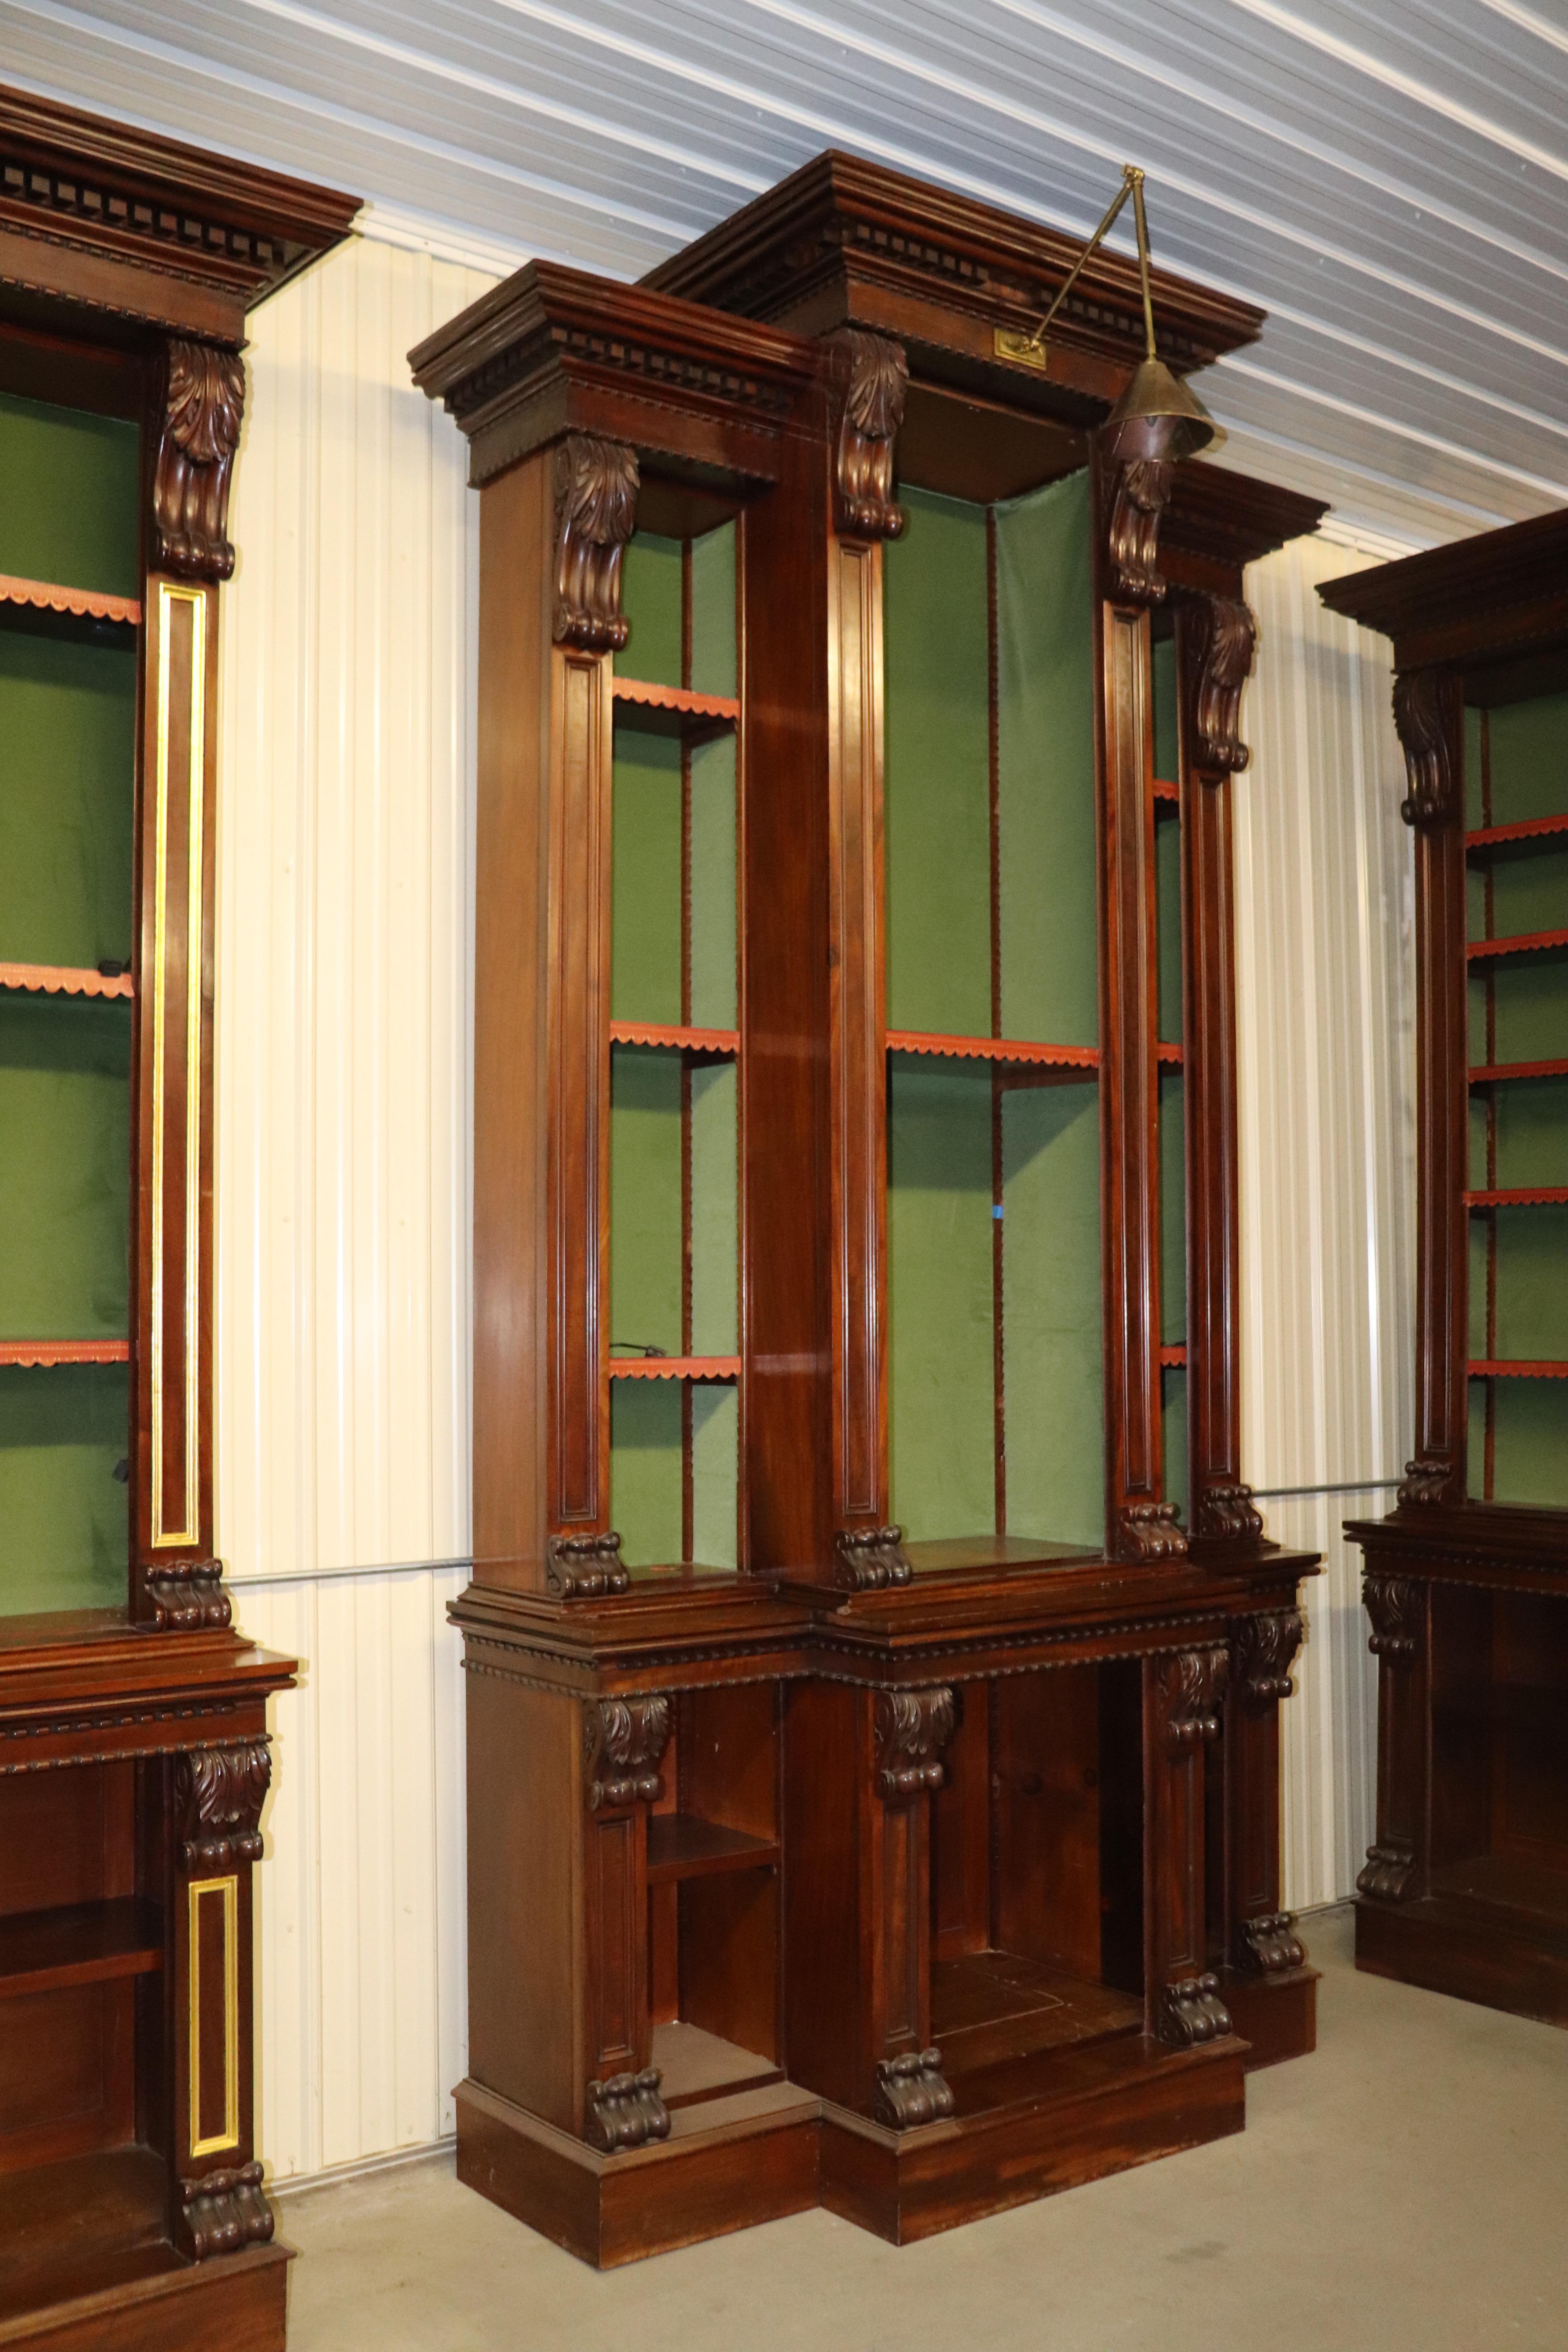 This is part of a 3-piece set and can be purchased as a set or separately. The bookcases were custom made for a bank owned by the Dupont family. They are made up of many pieces and do come completely apart. They have all been wired for electricity